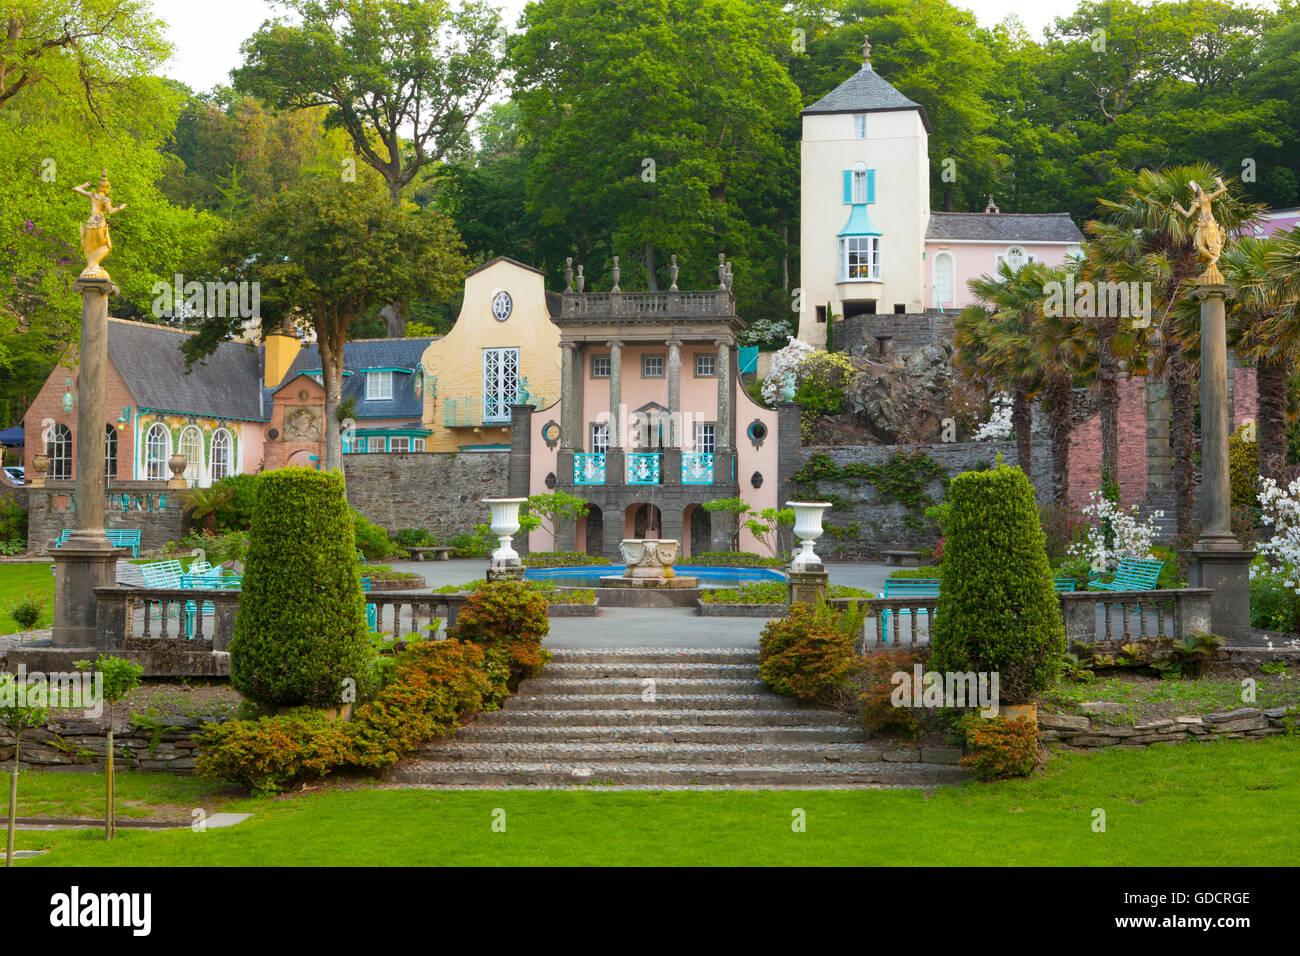 Portmeirion Village Piazza with (L-R) Salutation, Gloriette and Telford's Tower buildings, Portmeirion, Gwynedd, North Wales. Stock Photo